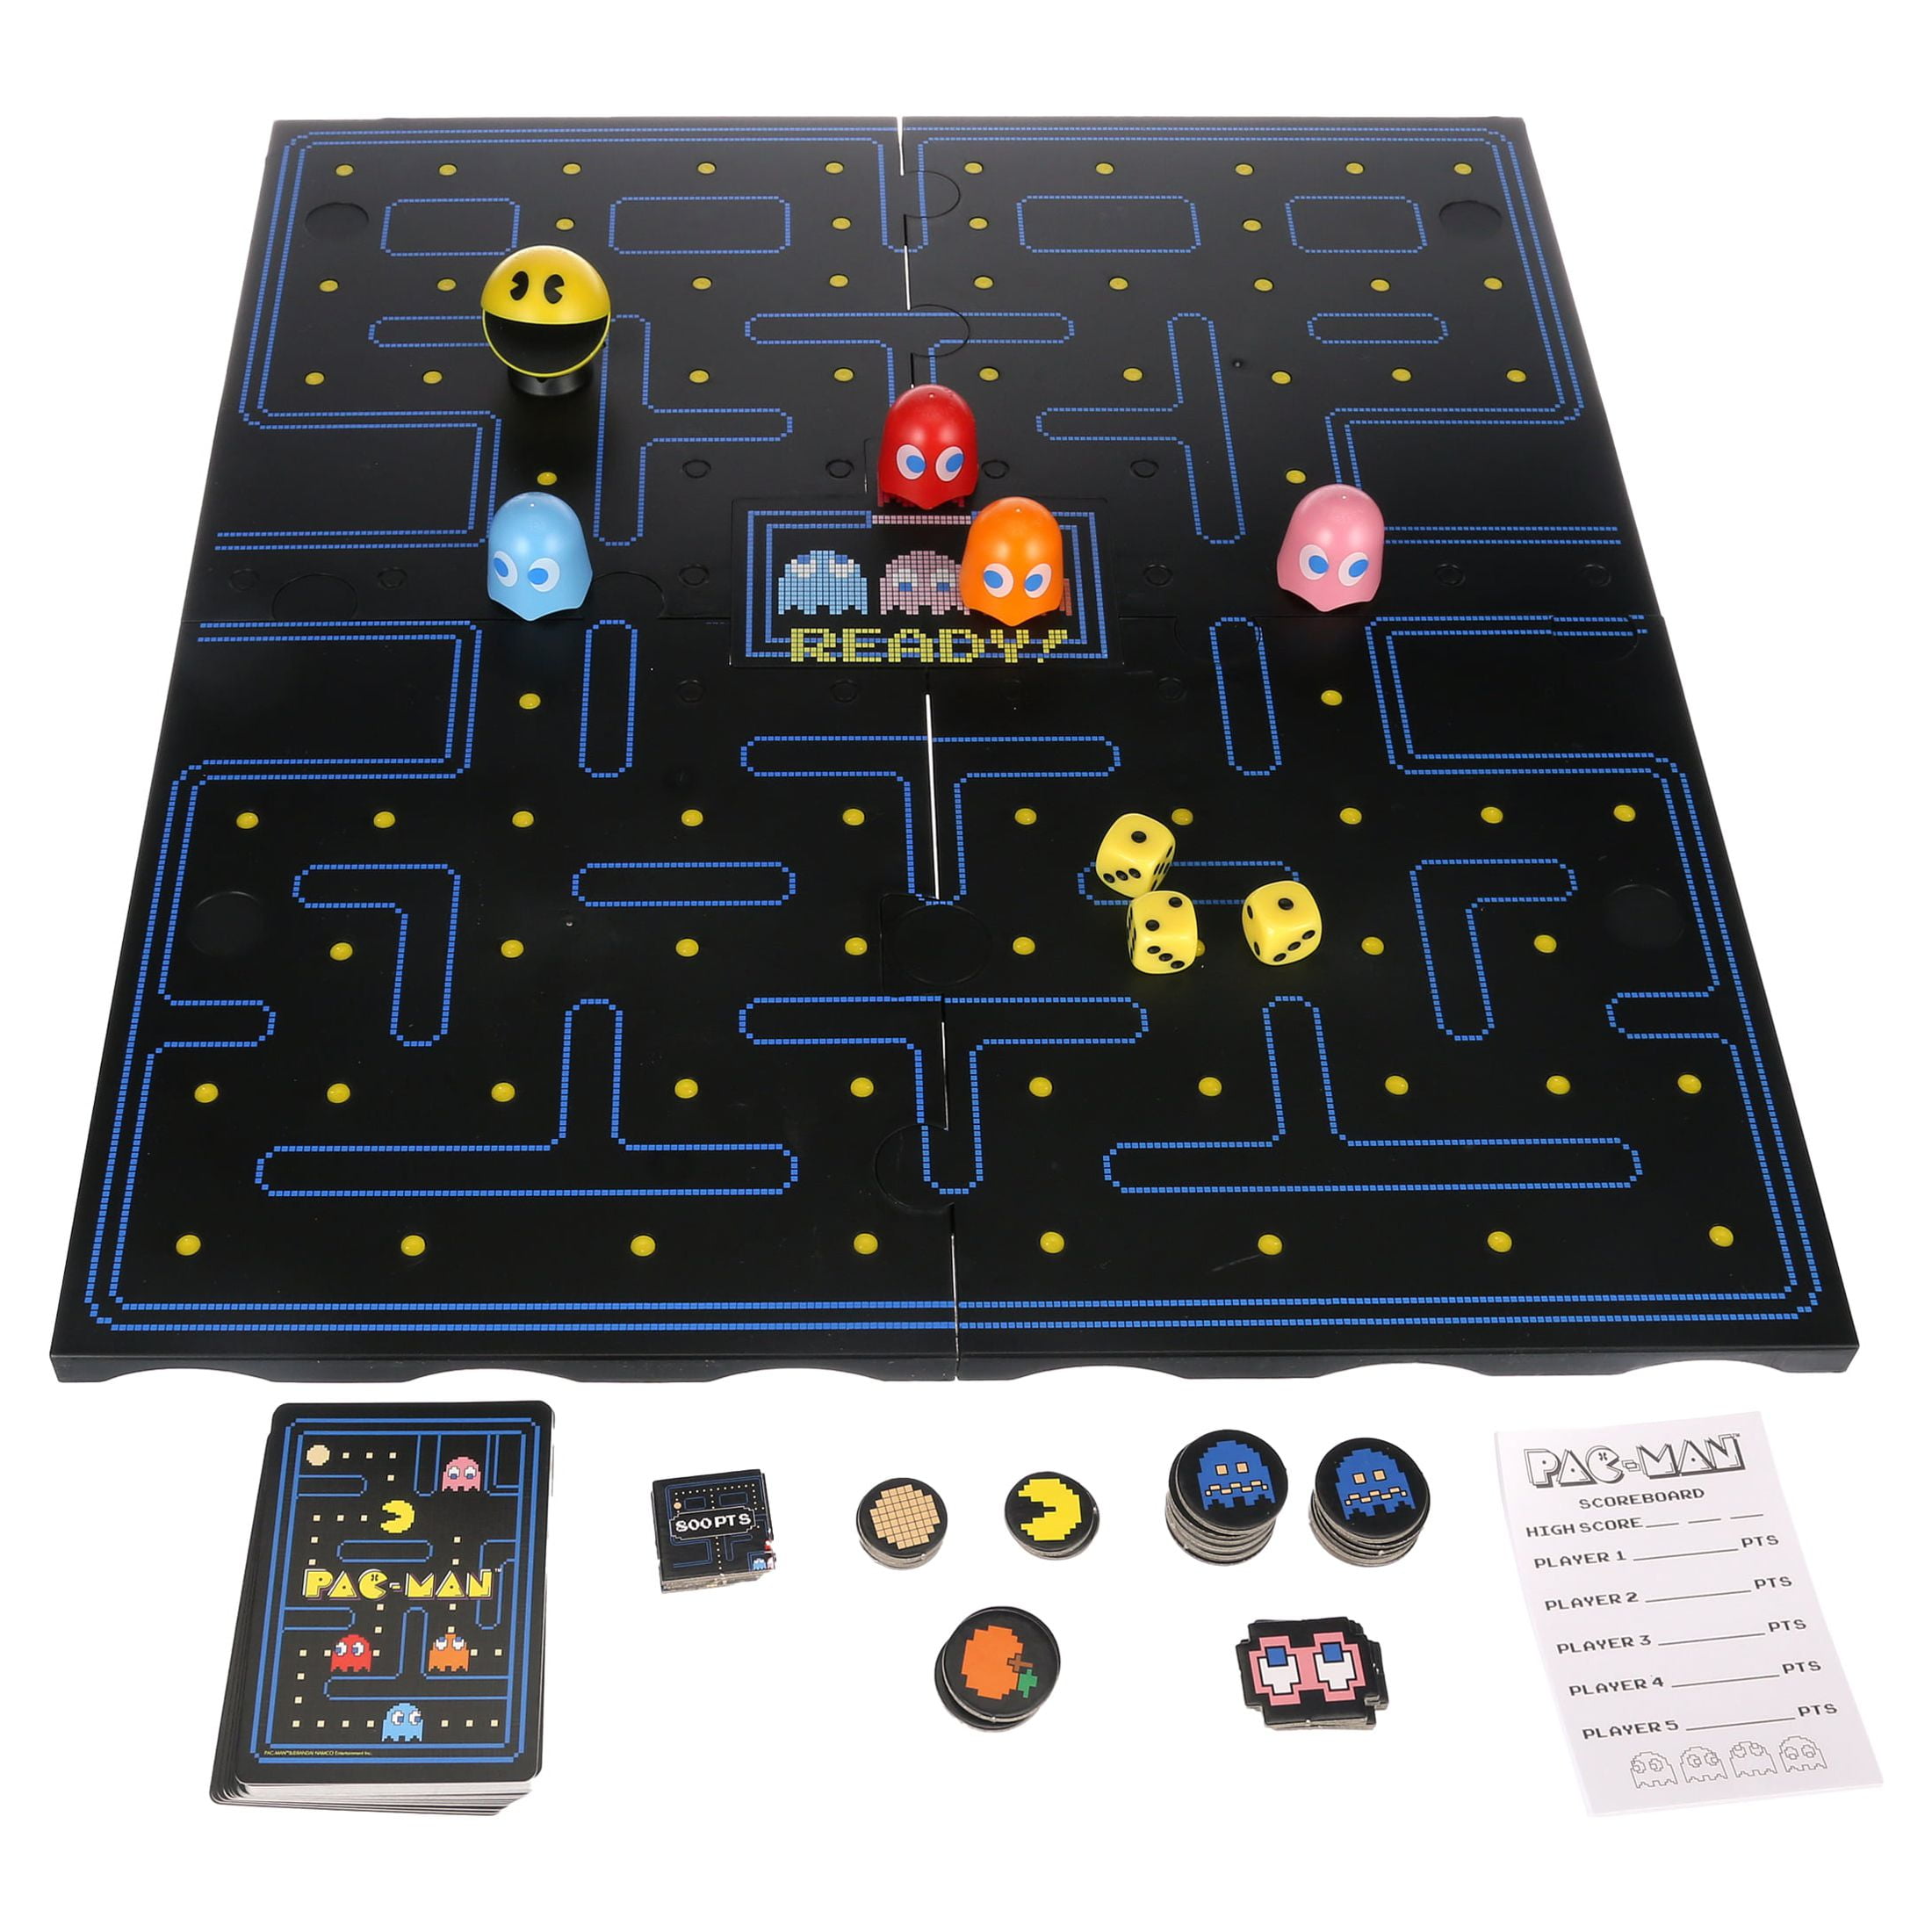  Buffalo Games - Pac-Man Game,10 years + : Toys & Games